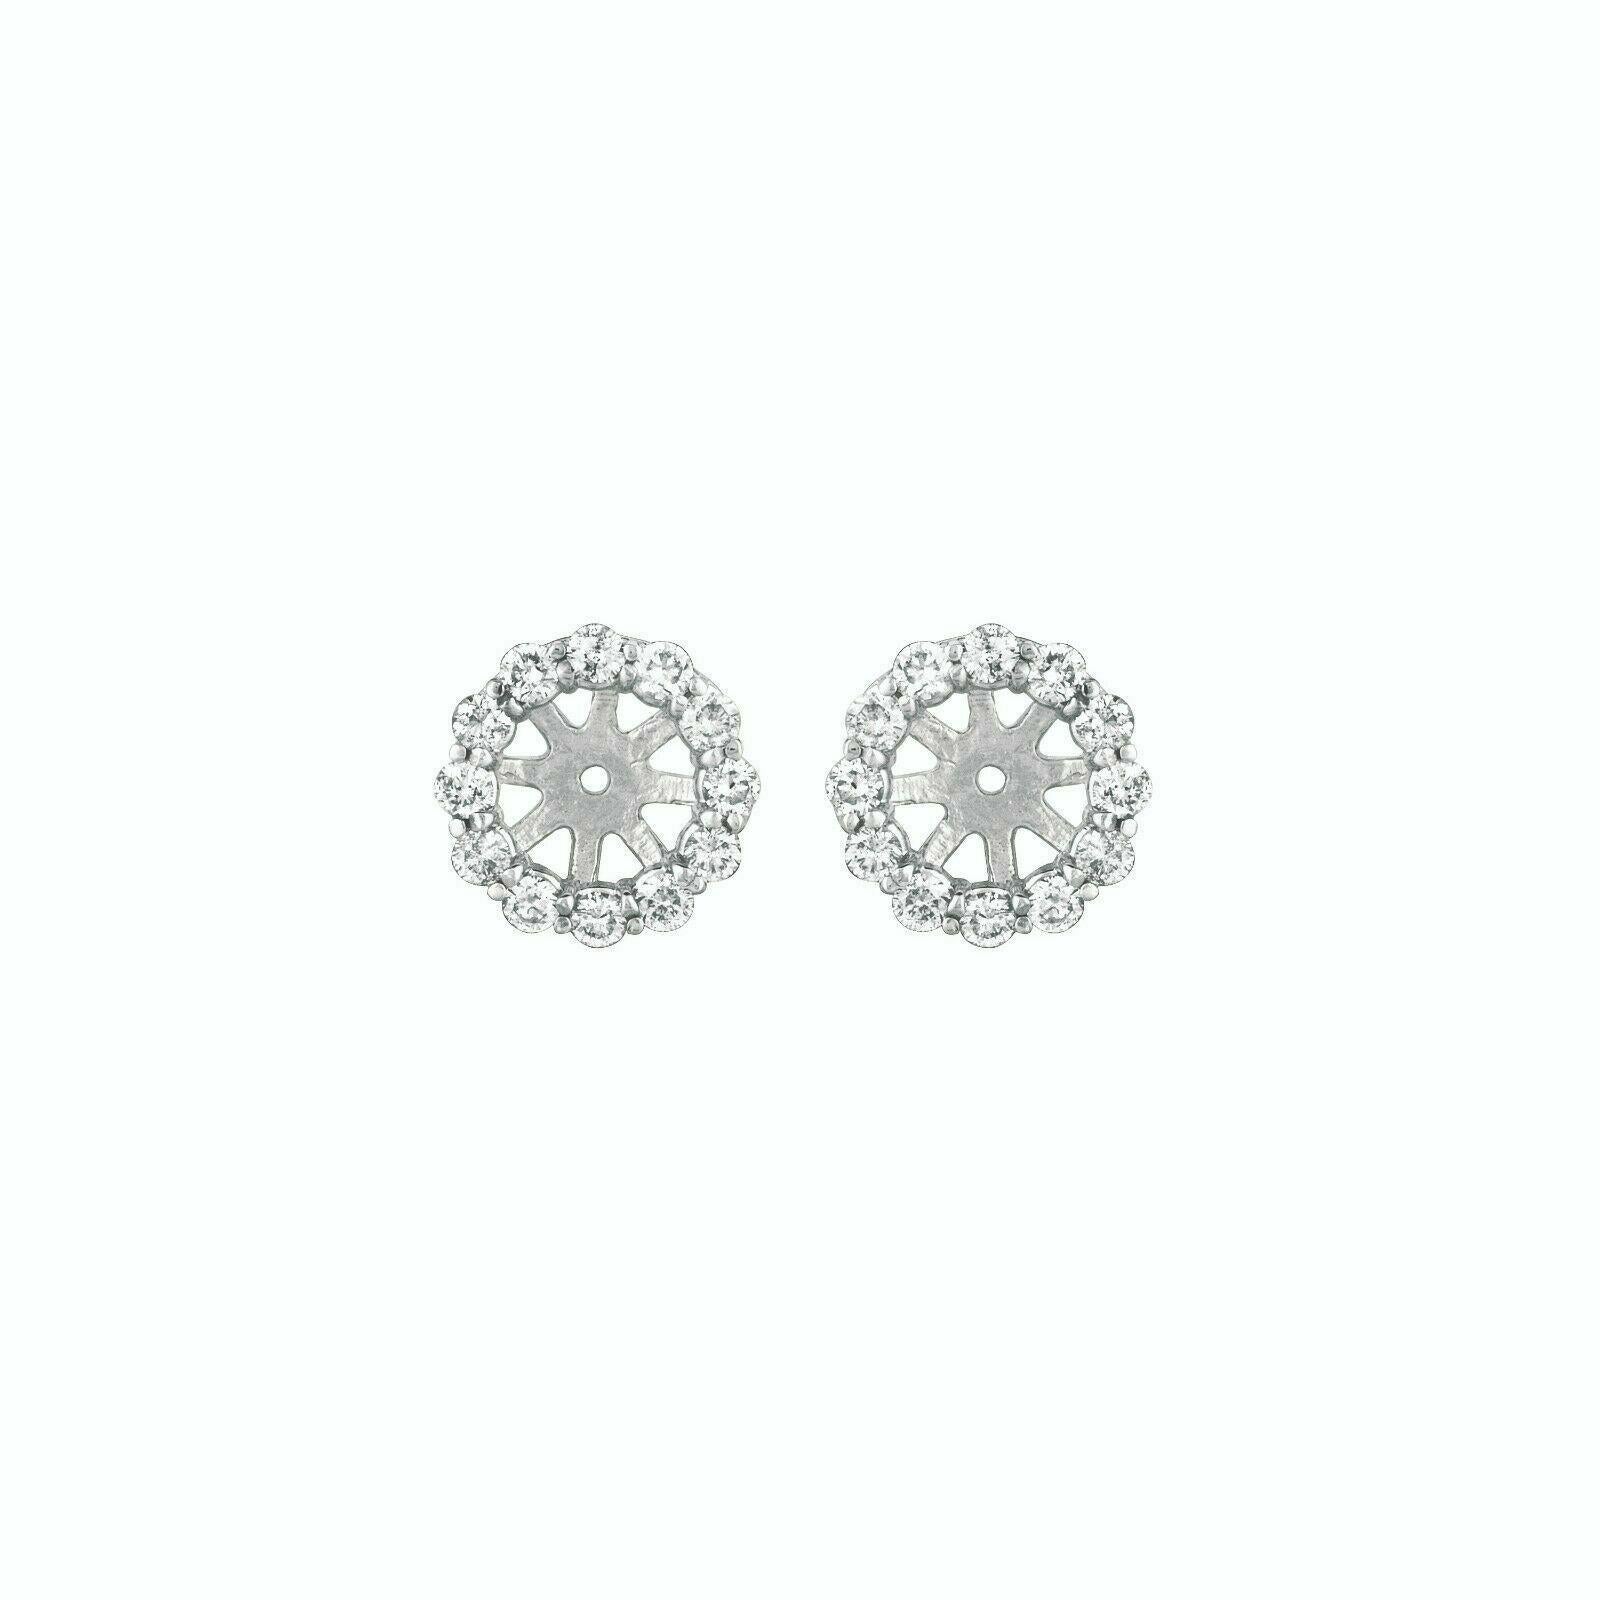 0.55 Ct 2 pointers Natural Diamond Jacket Earrings 14K White Gold center 6 MM

100% Natural, Not Enhanced in any way Round Cut Diamond Earrings
0.55CT
G-H 
SI  
14K White Gold  1.30 gram, prong style 
3/8 inches in width
center is for 6mm stone 
26